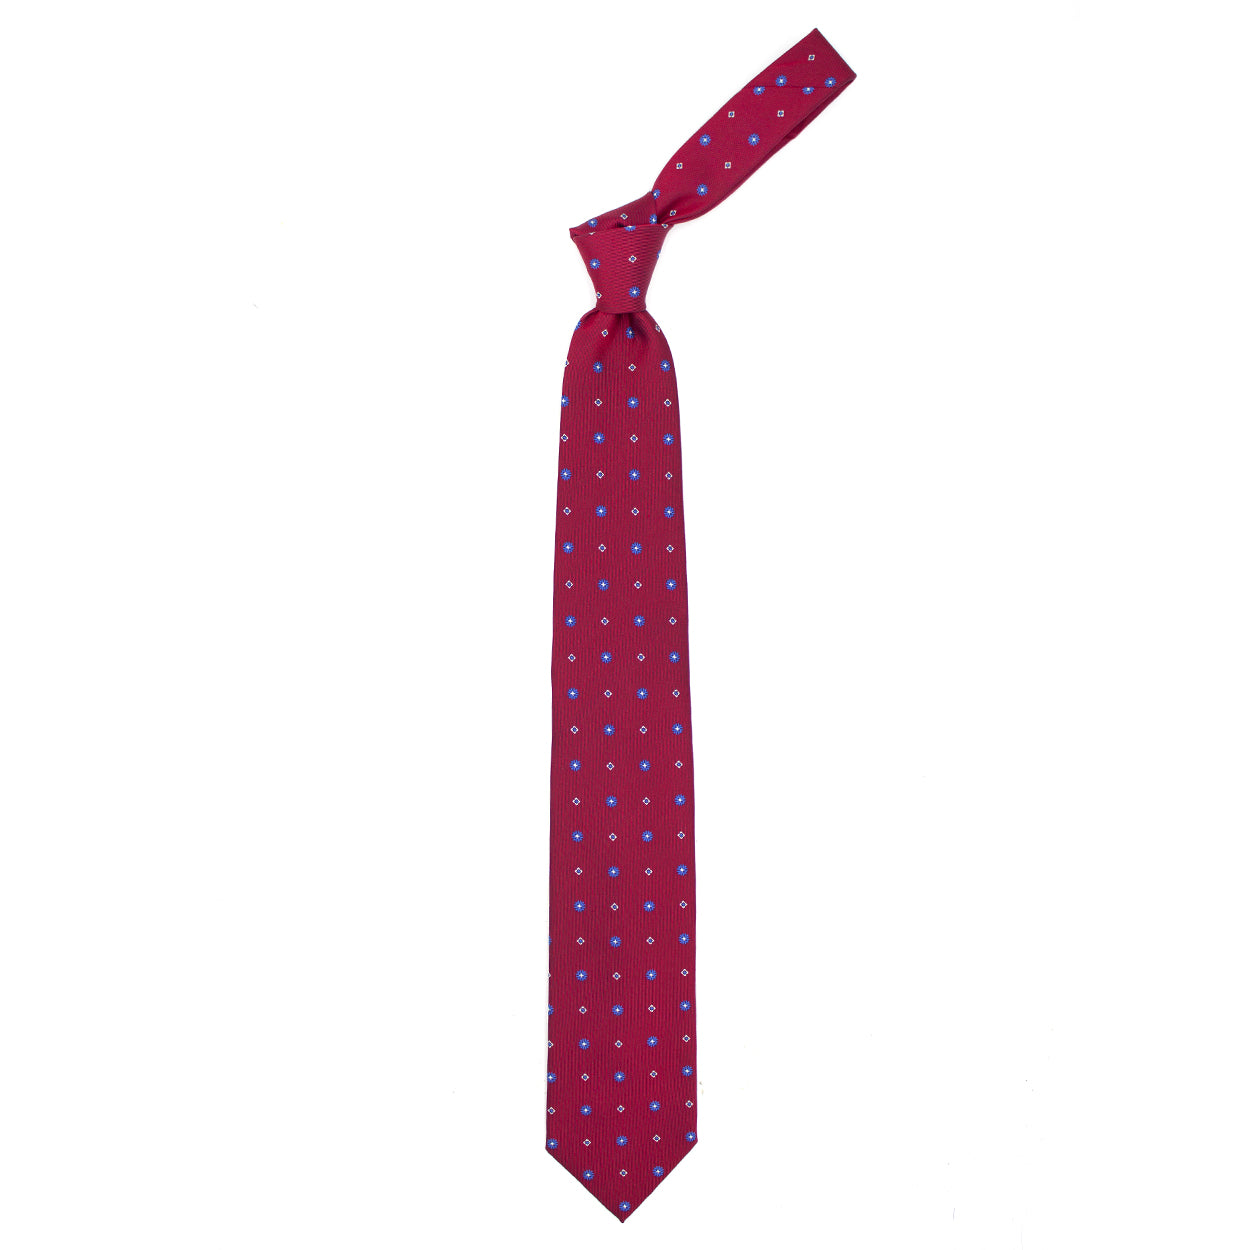 Red tie with white and blue flowers